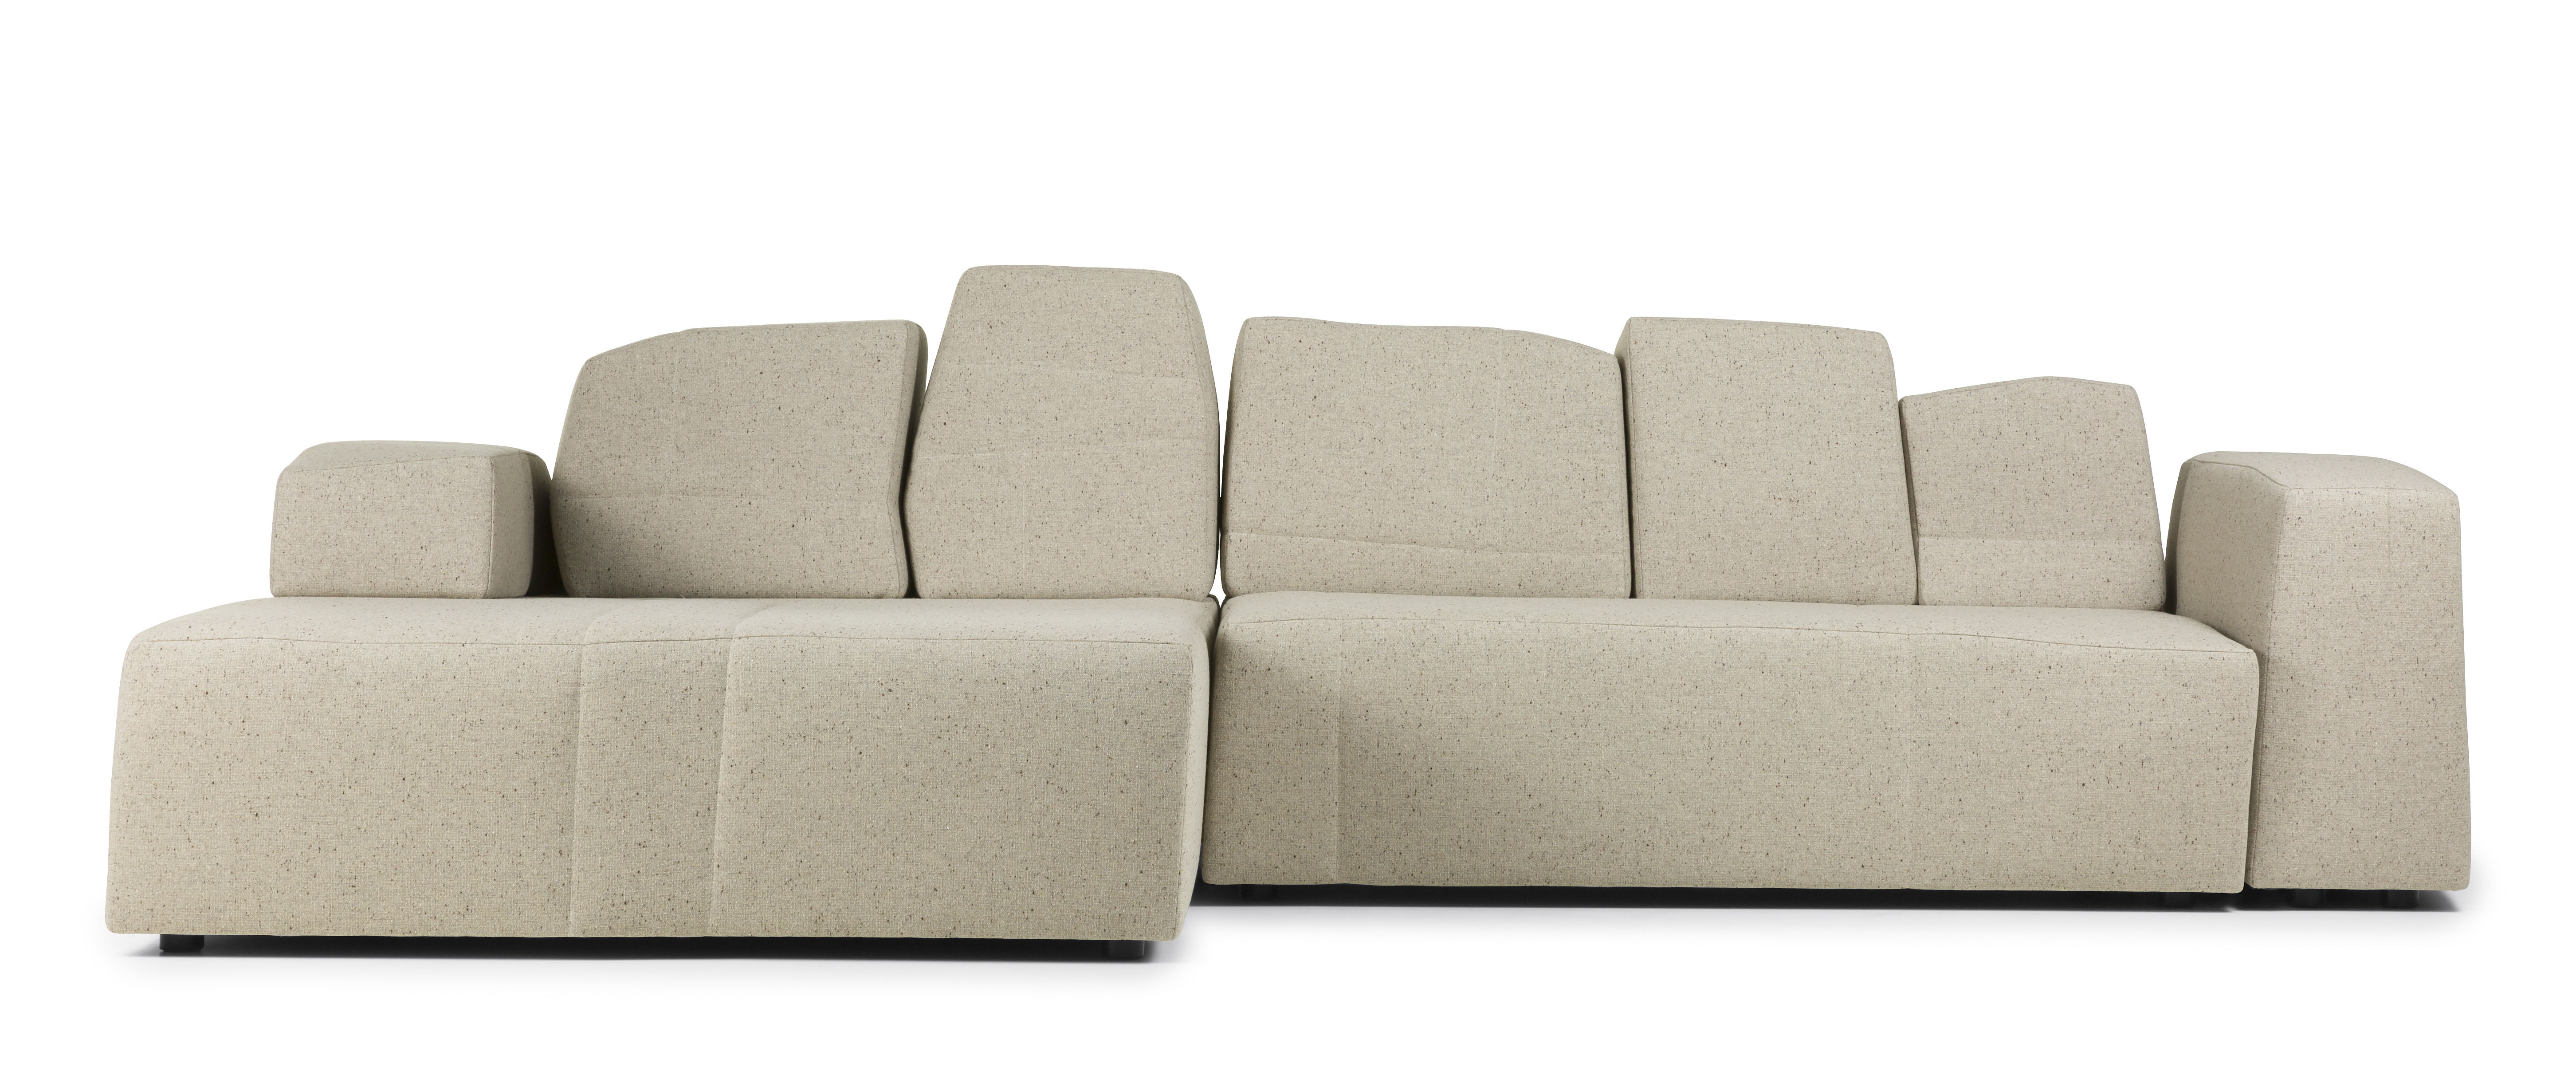 Canapé modulable Something Like This 2 modules / 3 places - L 307 cm - Moooi beige en tissu